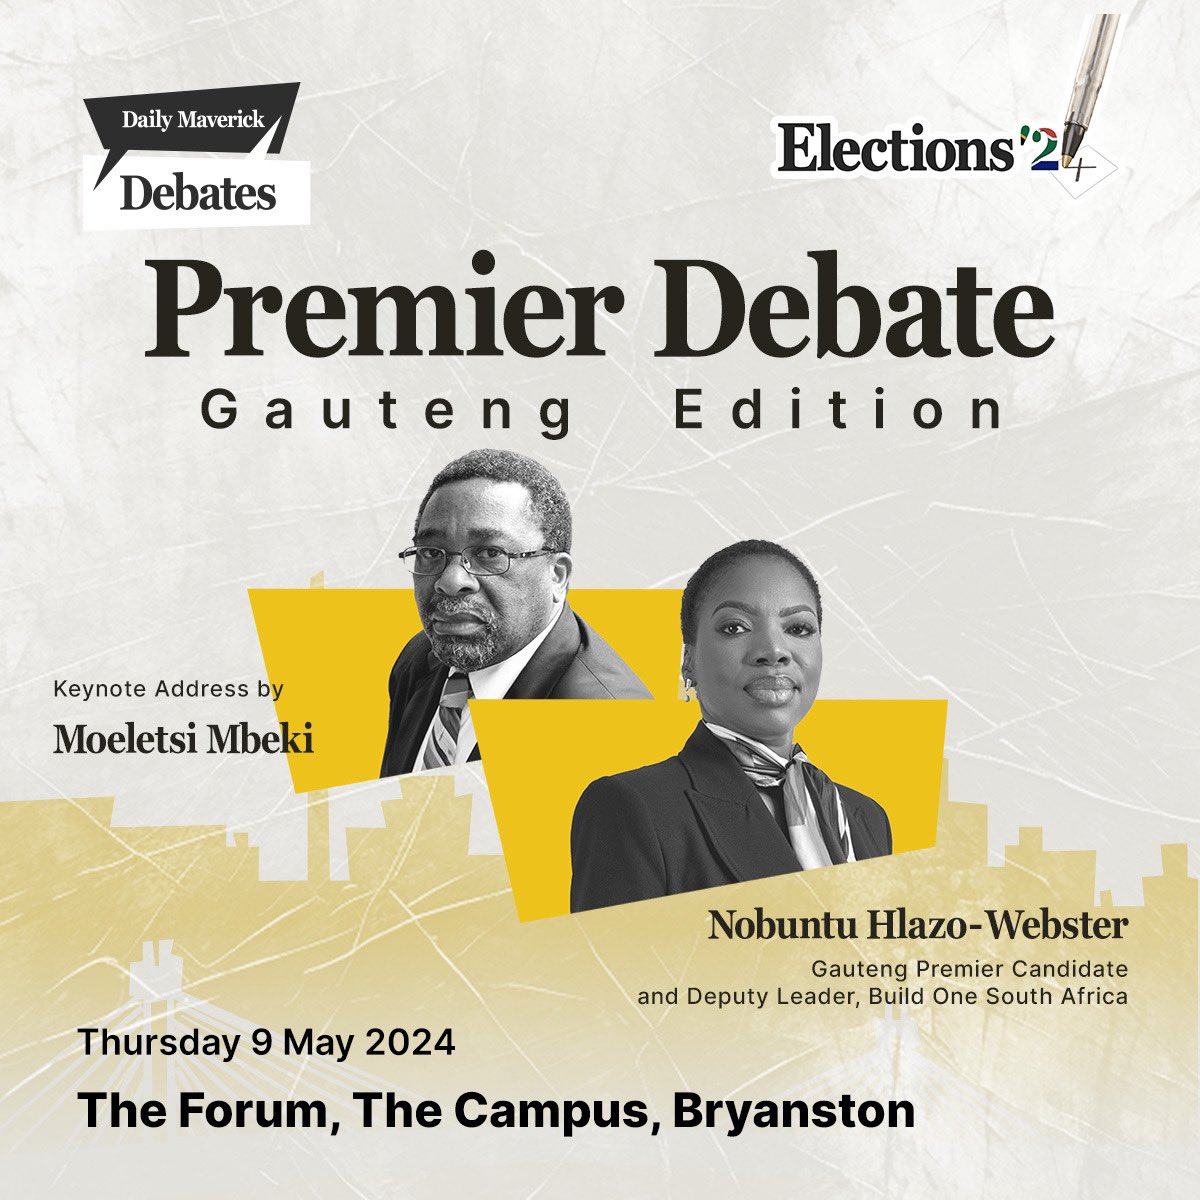 Just announced, Moeletsi Mbeki will be delivering a key note address at Daily Maverick Debates next Thursday, 9th May. Nobuntu Hlazo Webster, Gauteng Premier Candidate and Deputy Leader, @buildonesa will be joining the panel. Buy your tickets now: qkt.io/dmdebatesgaute…